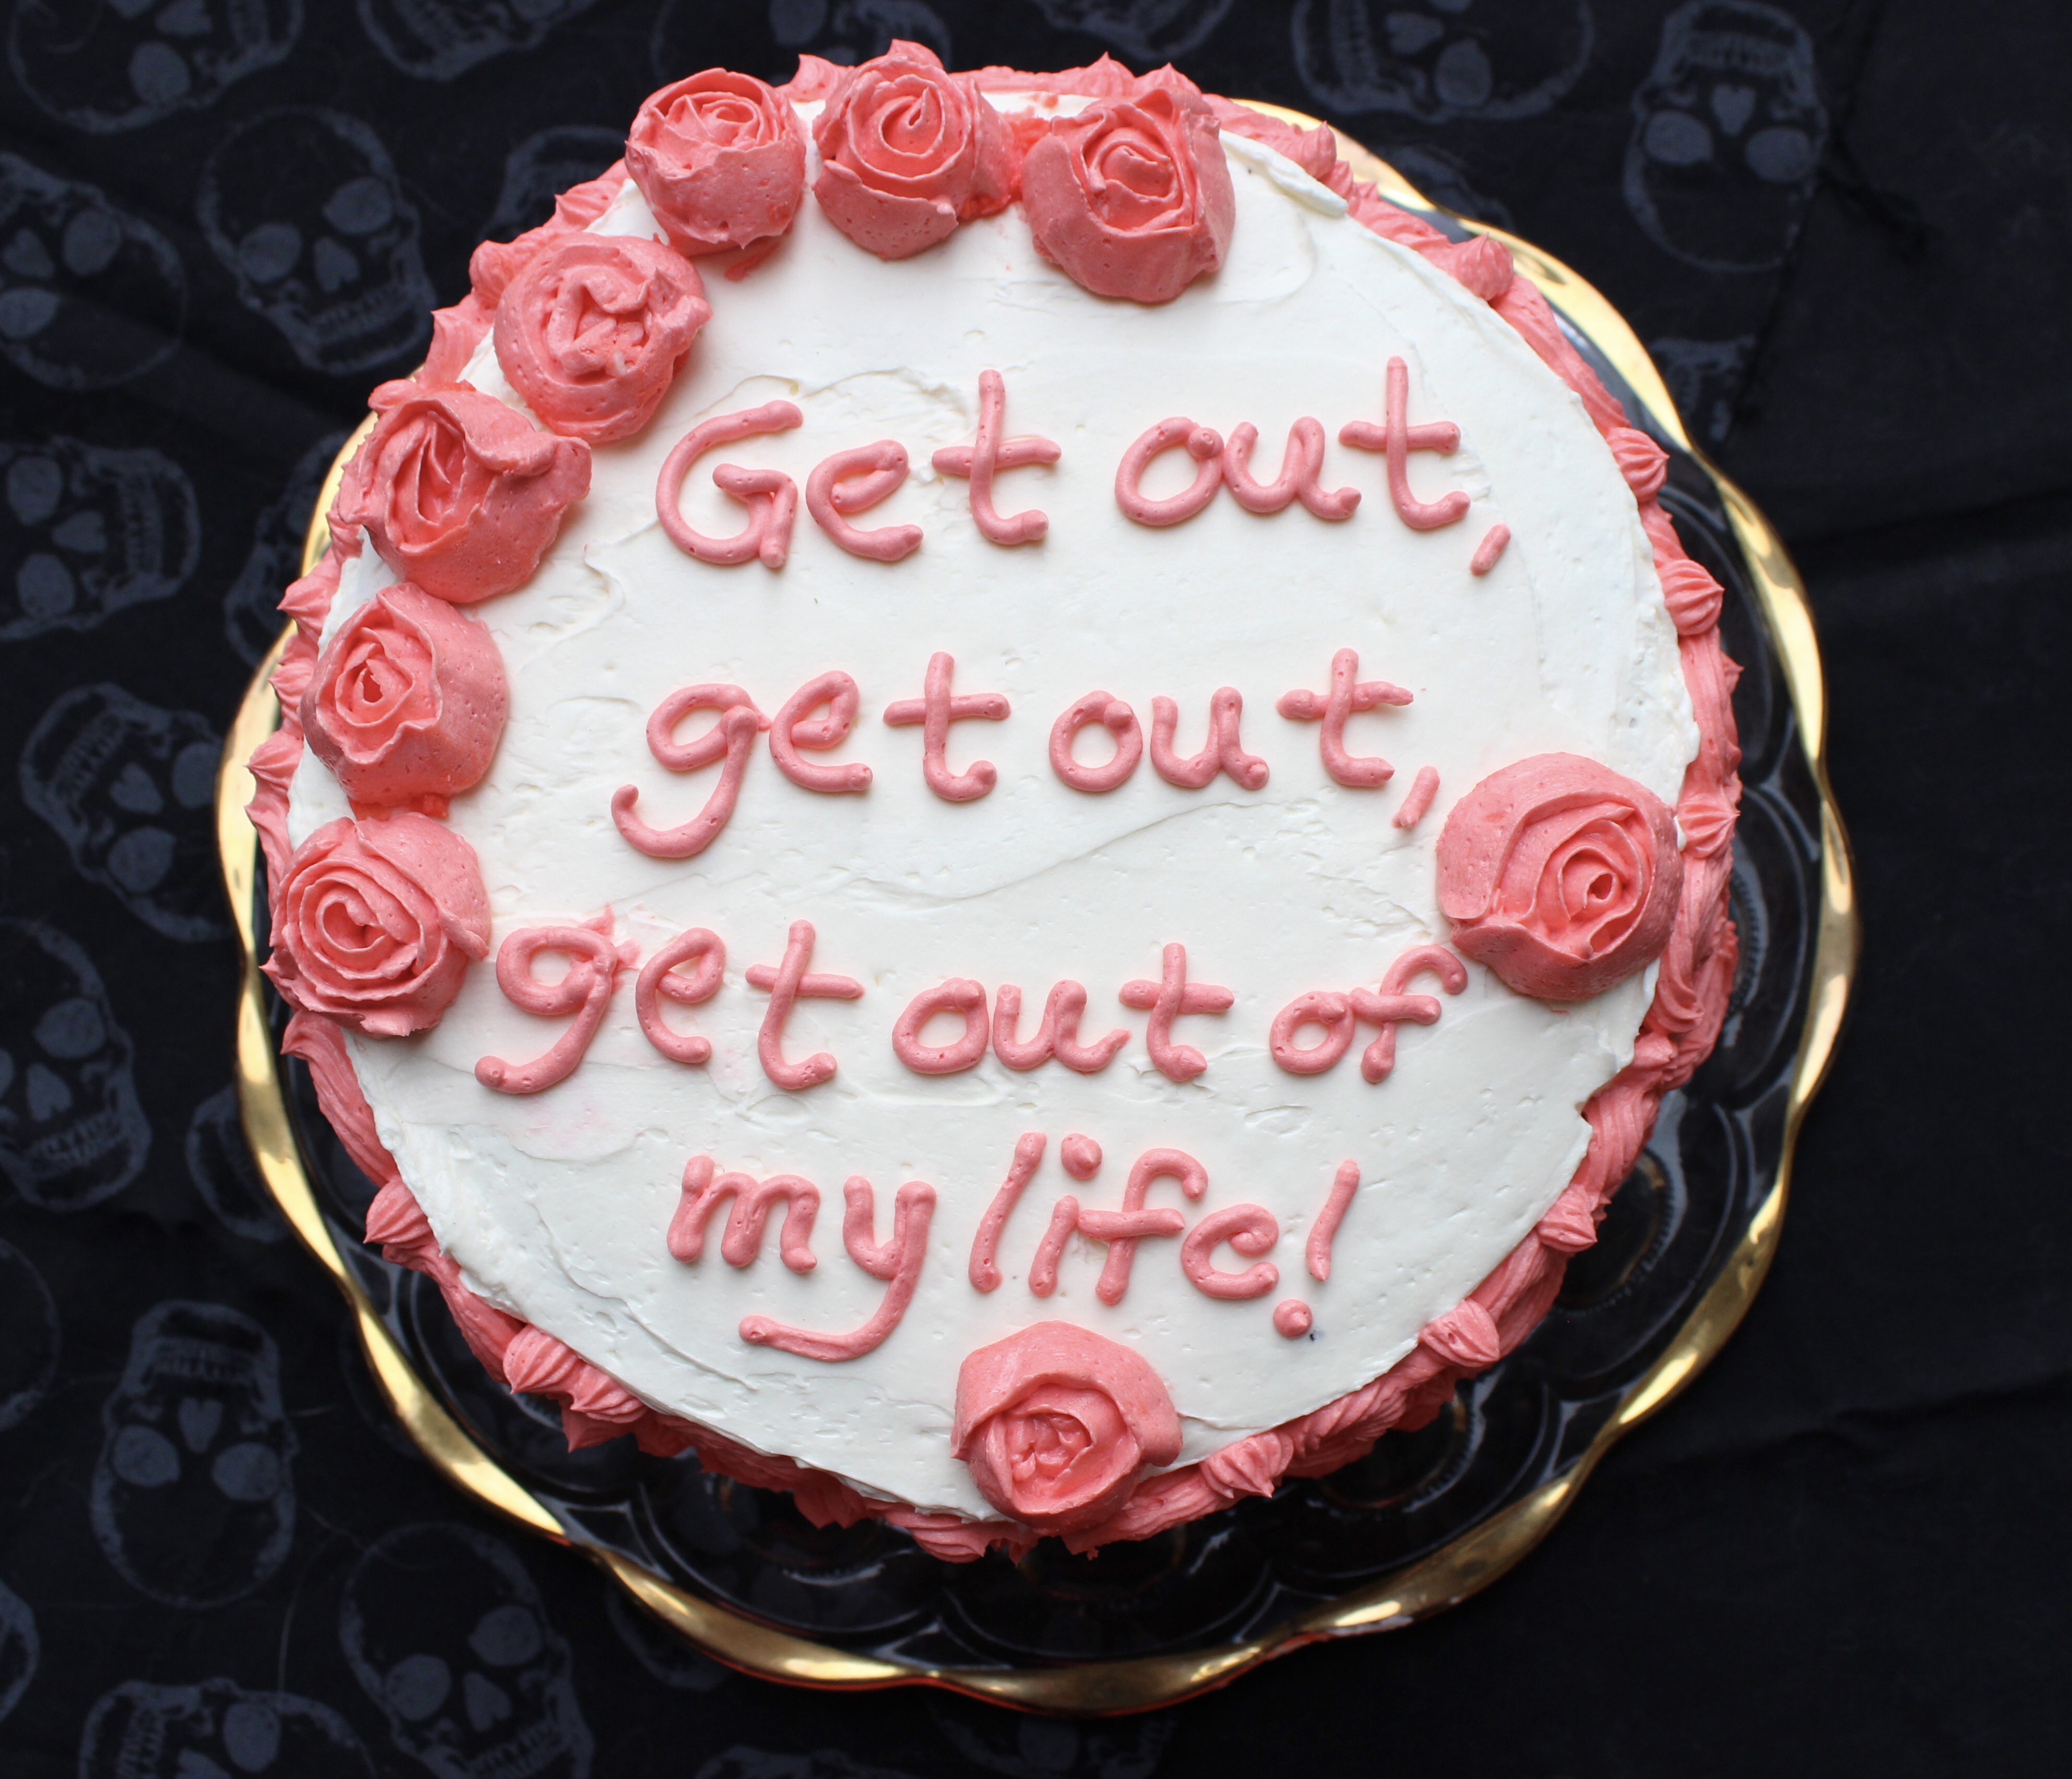 The Room on Cake 1: “Get out, get out, get out of my life!”